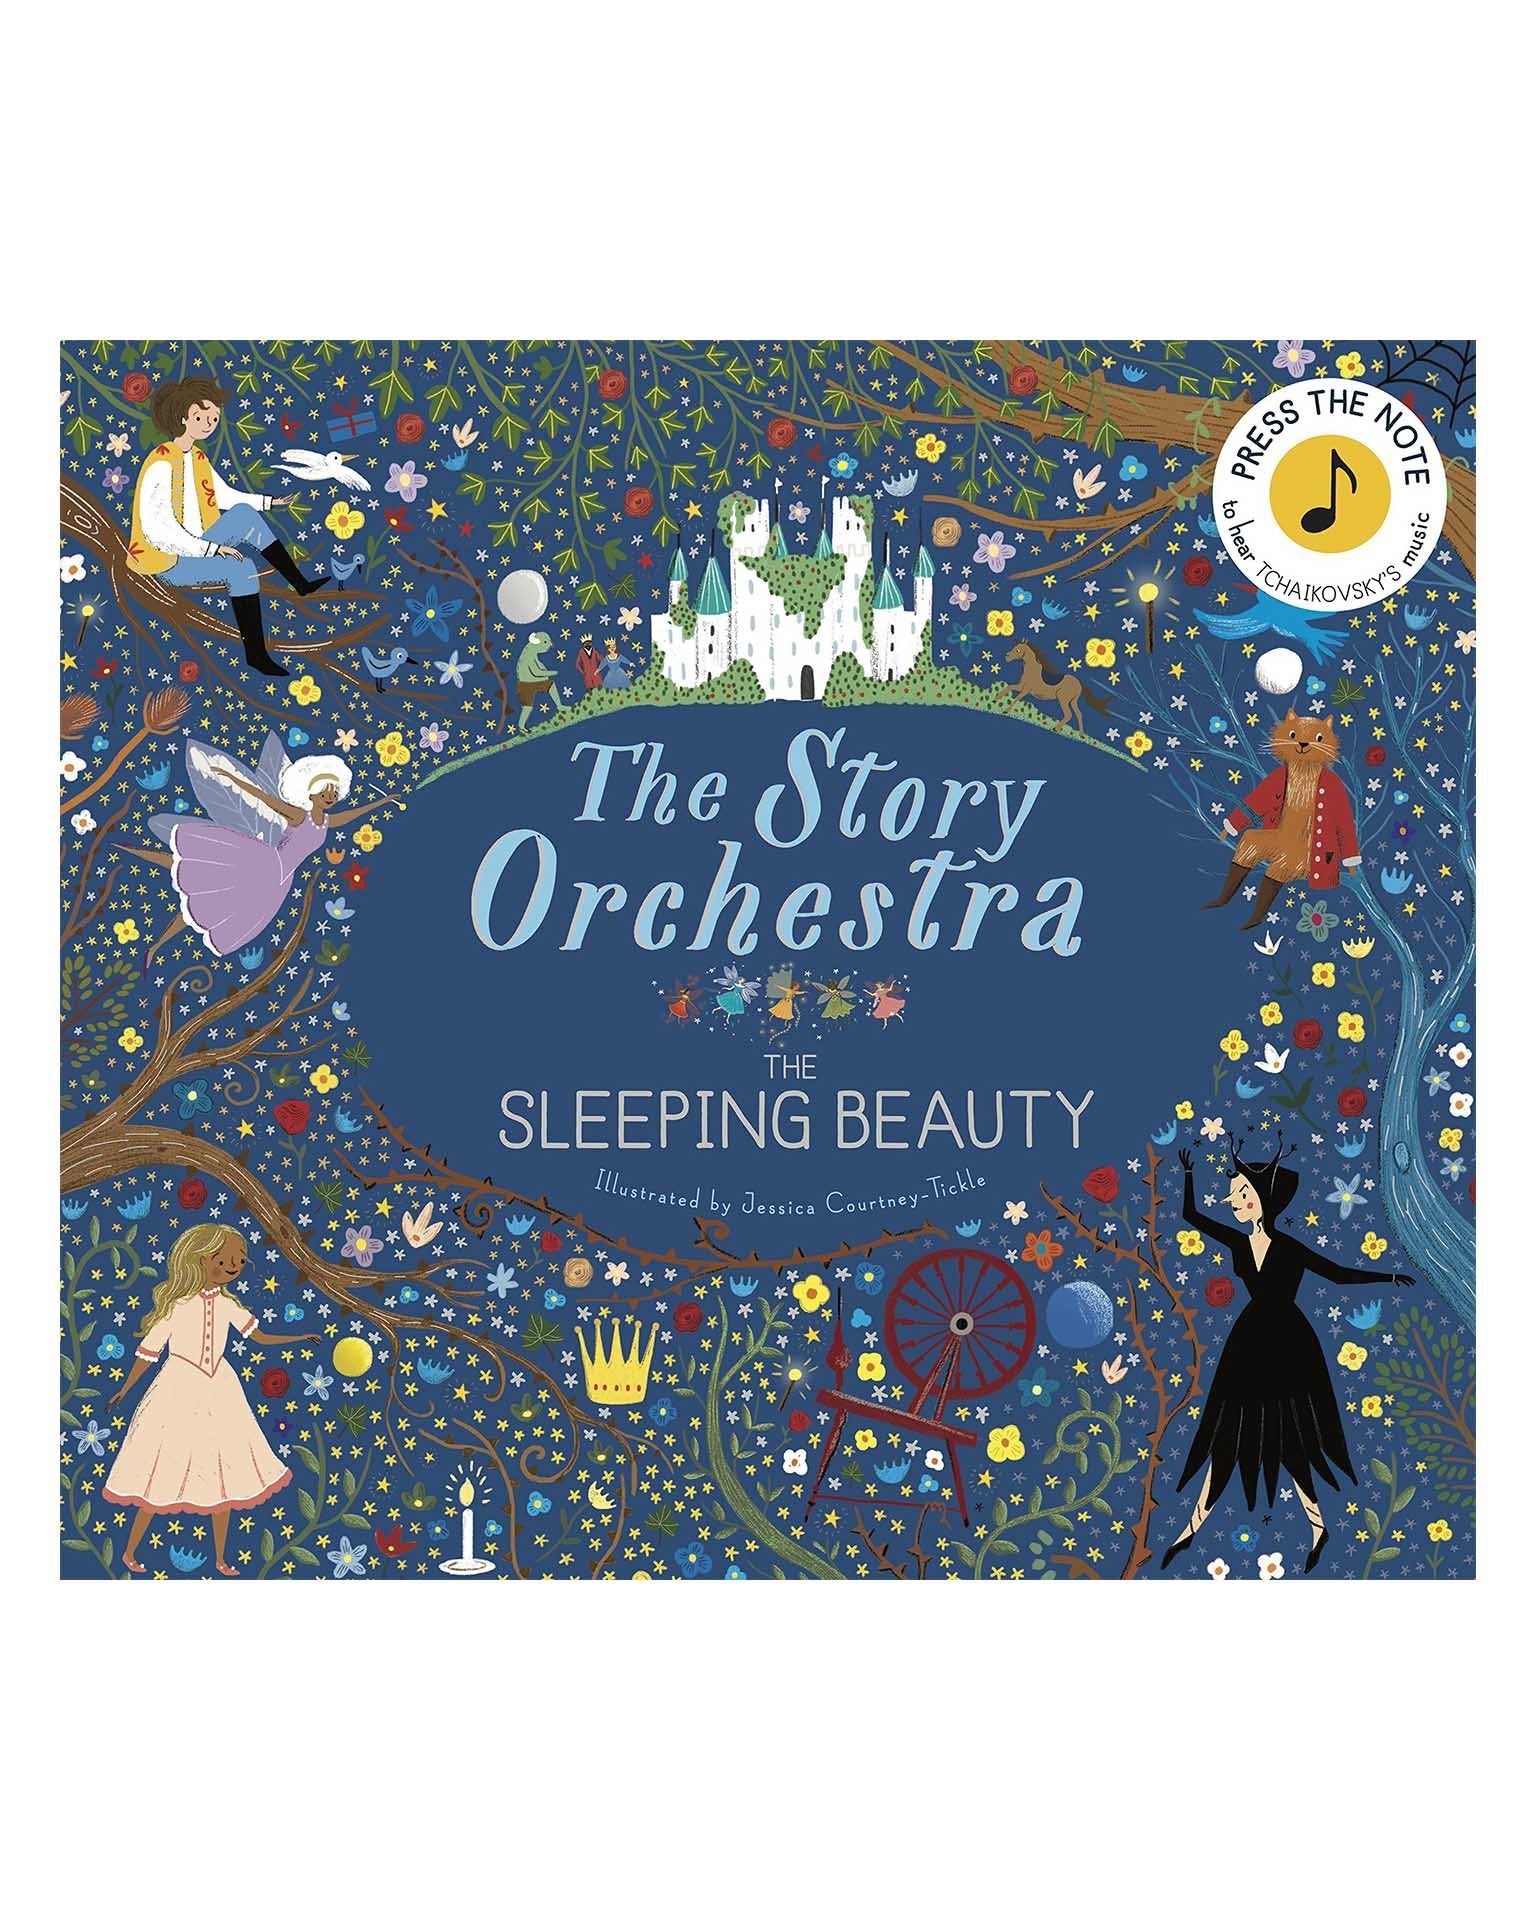 Little quarto publishing group play the story orchestra: the sleeping beauty